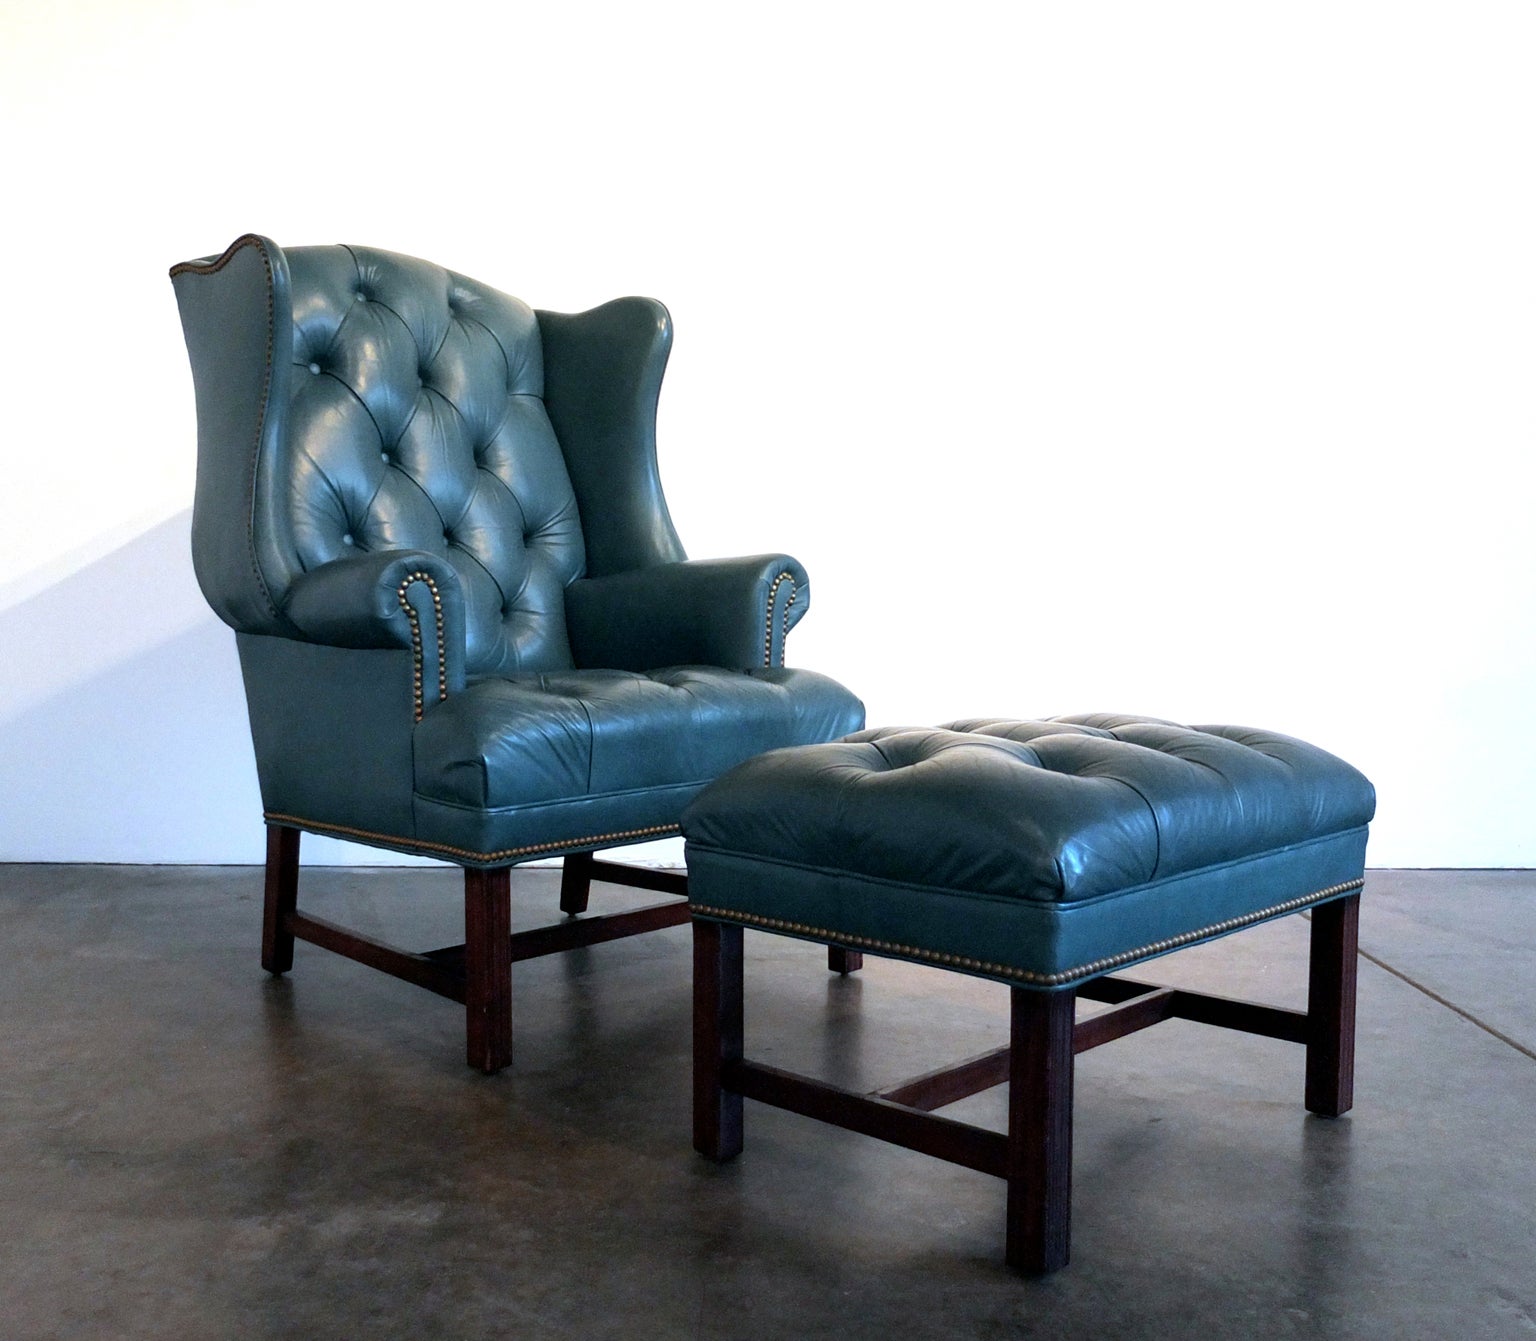 Tufted Leather Wingback Chair and Ottoman by Hancock & Moore